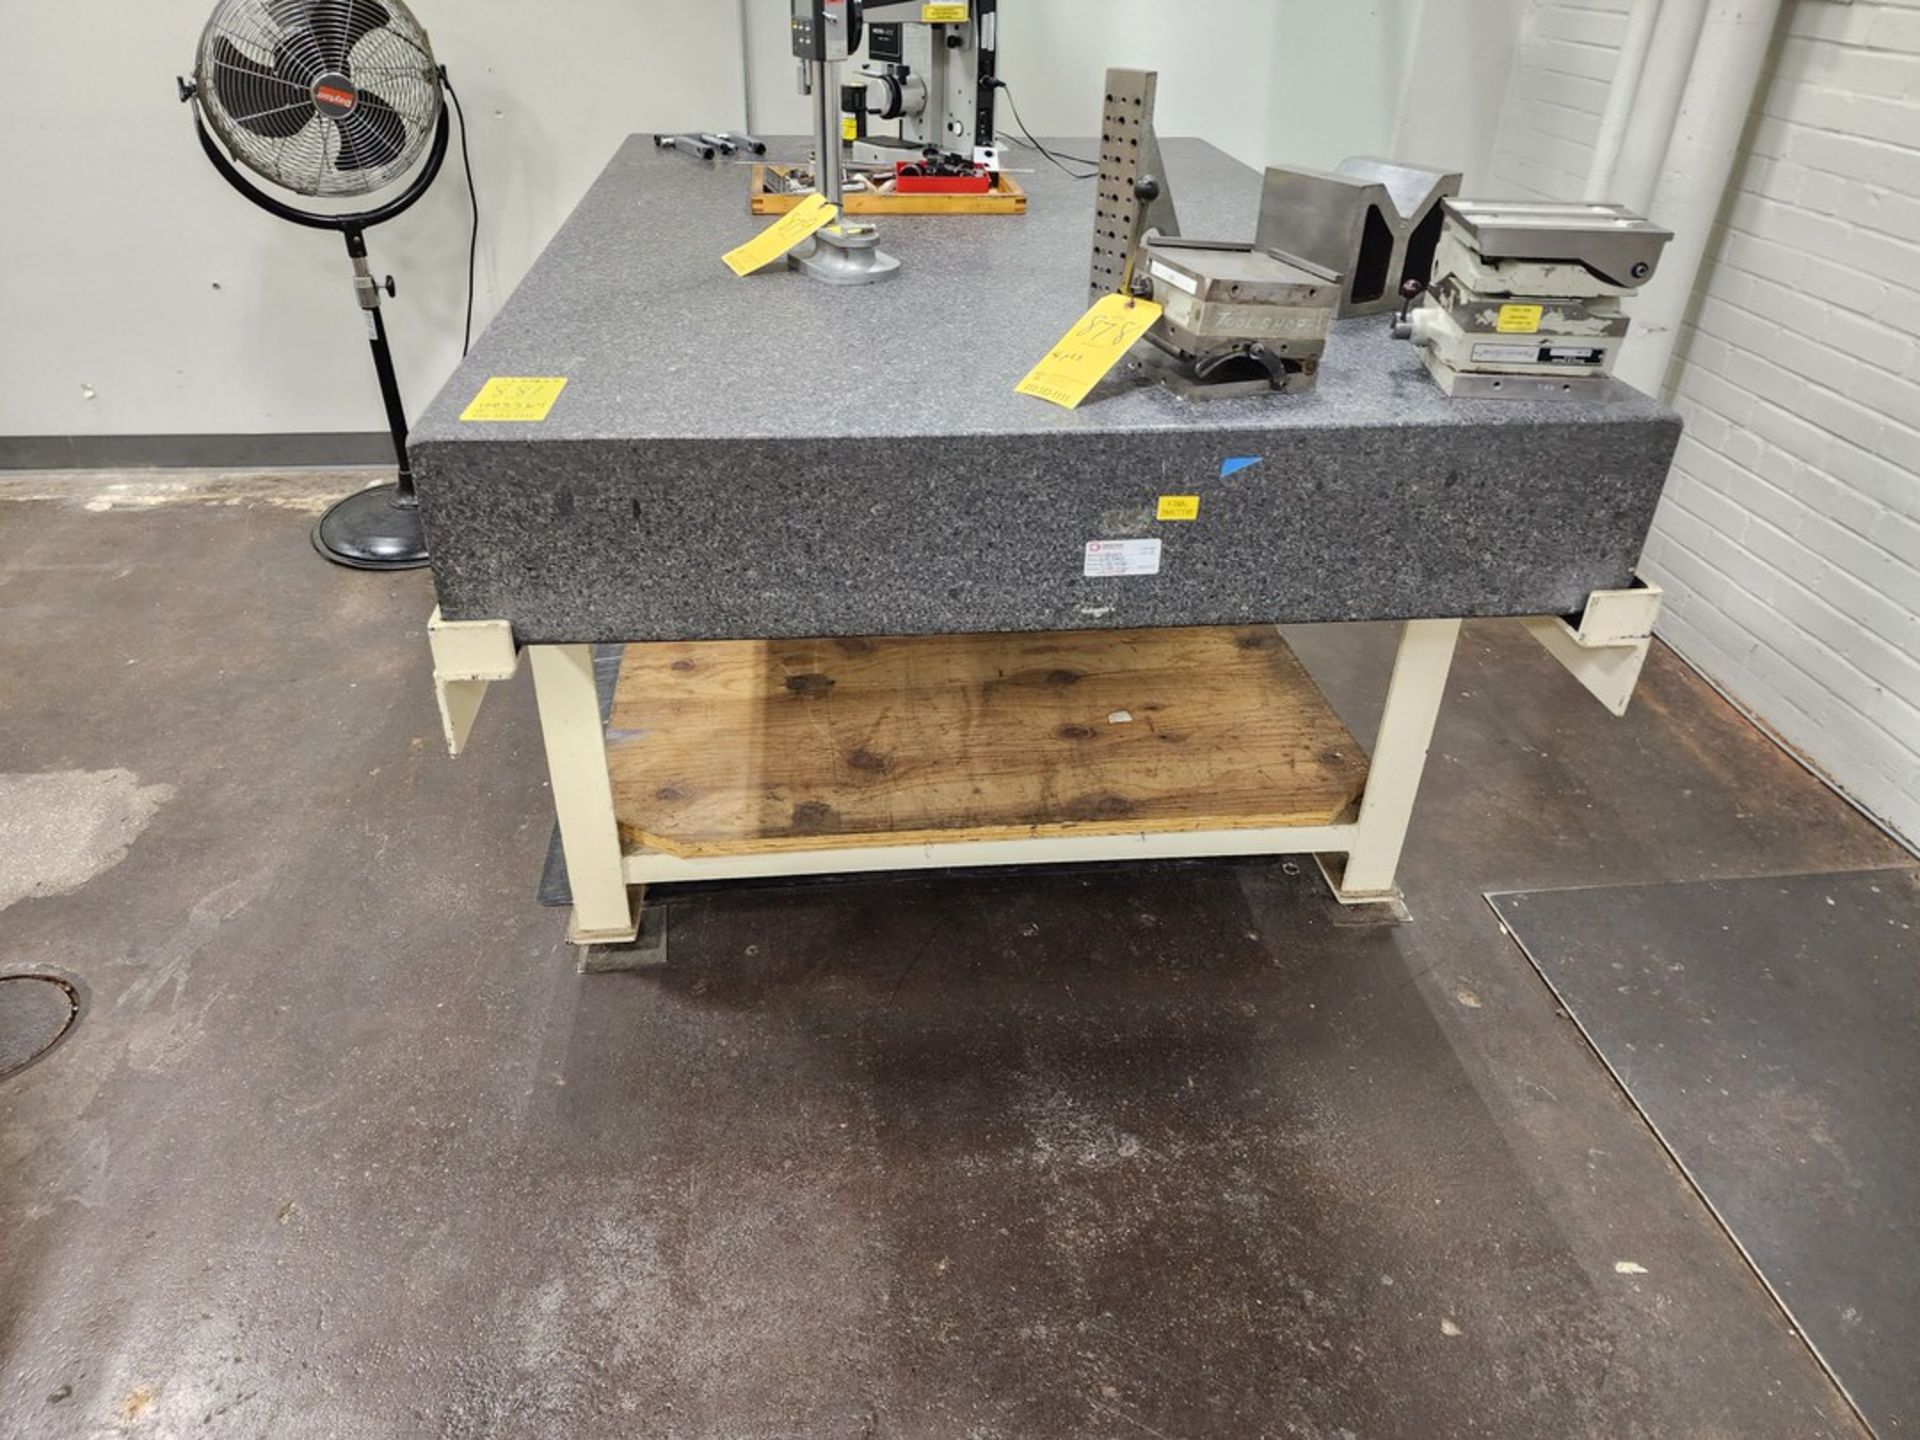 Surface Granite Plate W/ Stand 72" x 48" x 9" (Contents Excl.) - Image 2 of 3